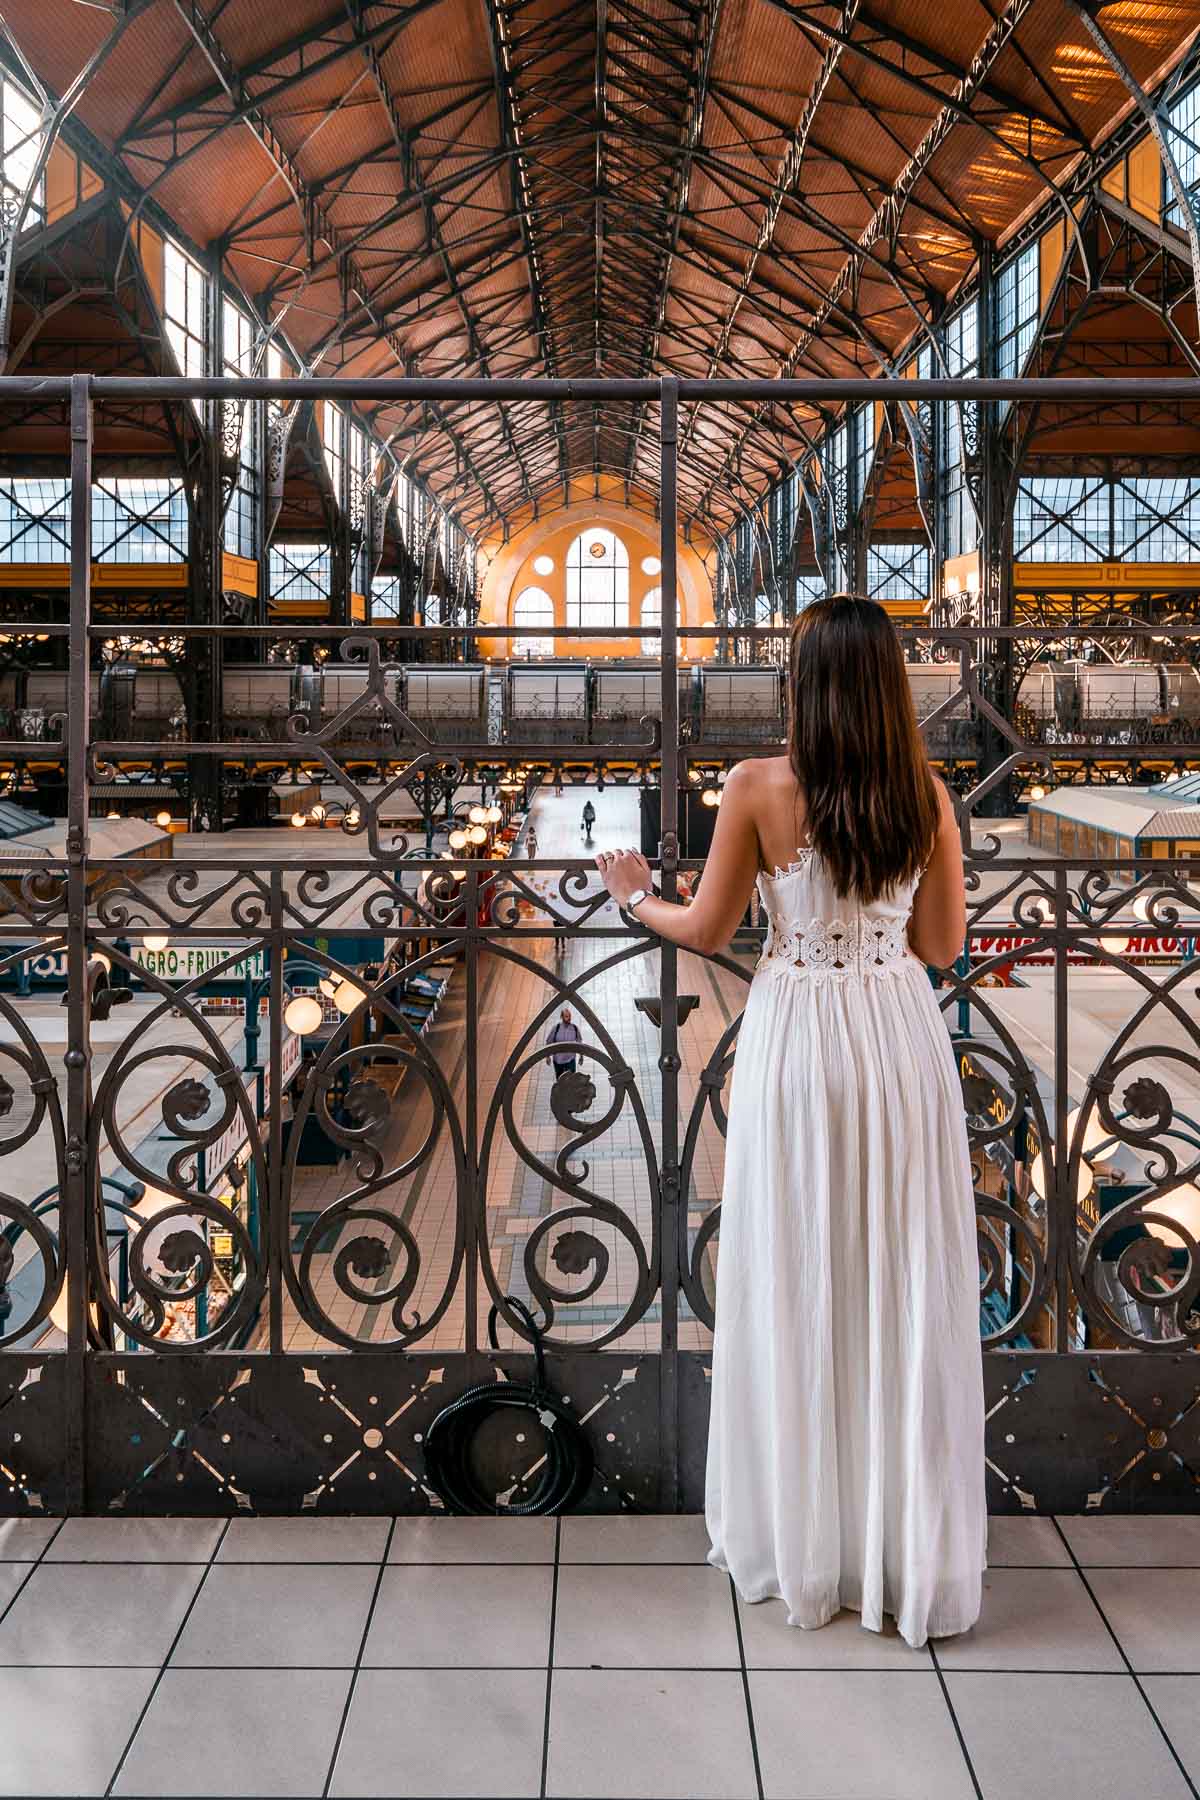 Girl in a white dress standing in the Great Market Hall in Budapest